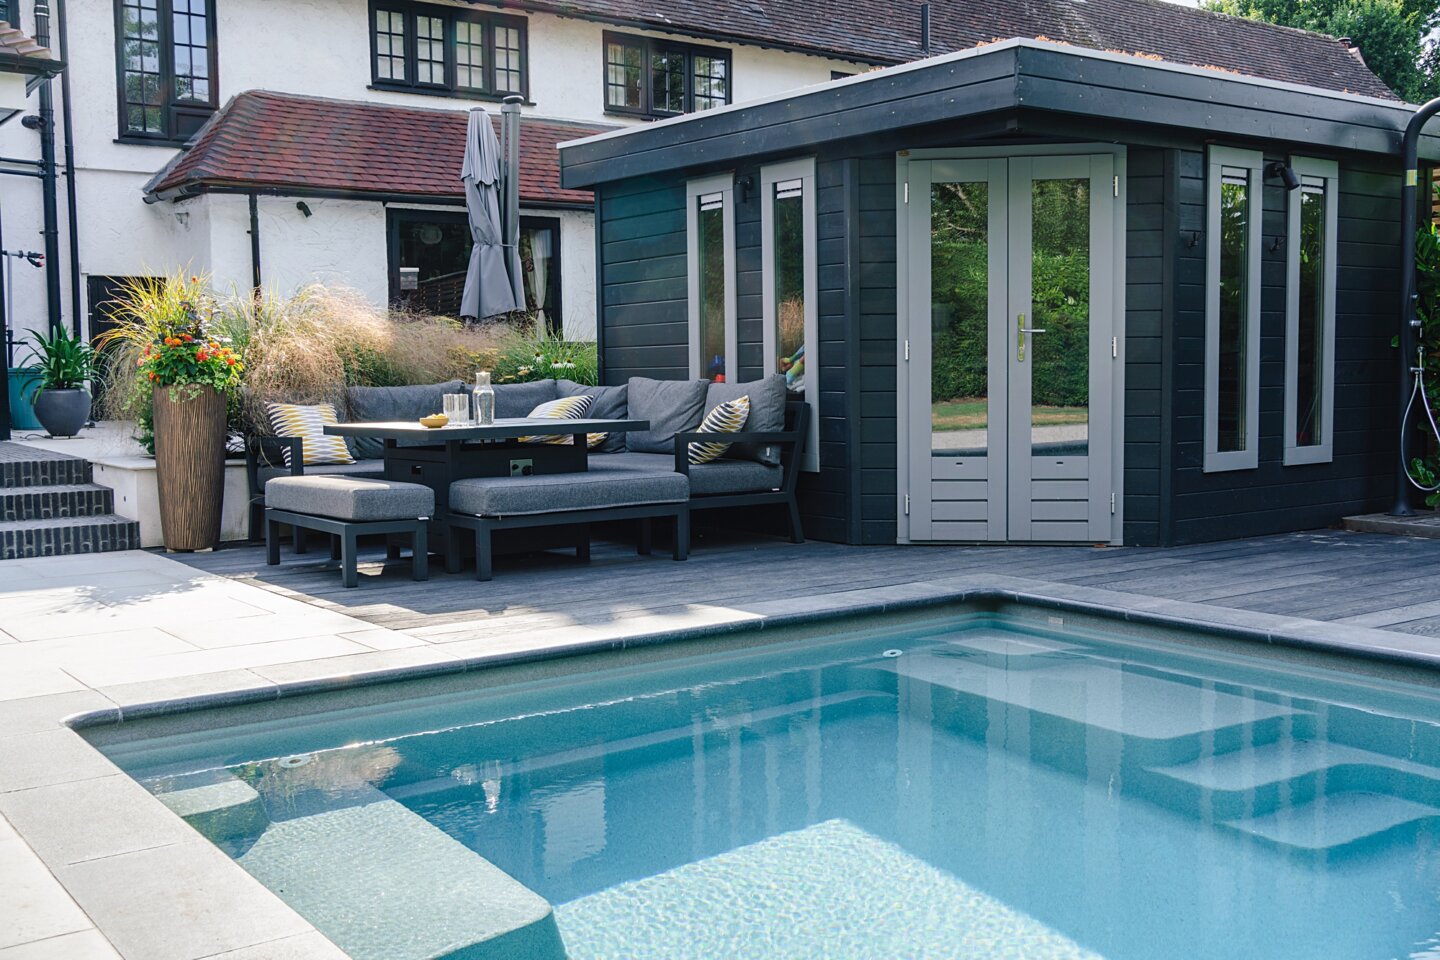 Pool house and seating area with outdoor shower and mixed paving plus decking - family garden design by Helen Rose Wilson